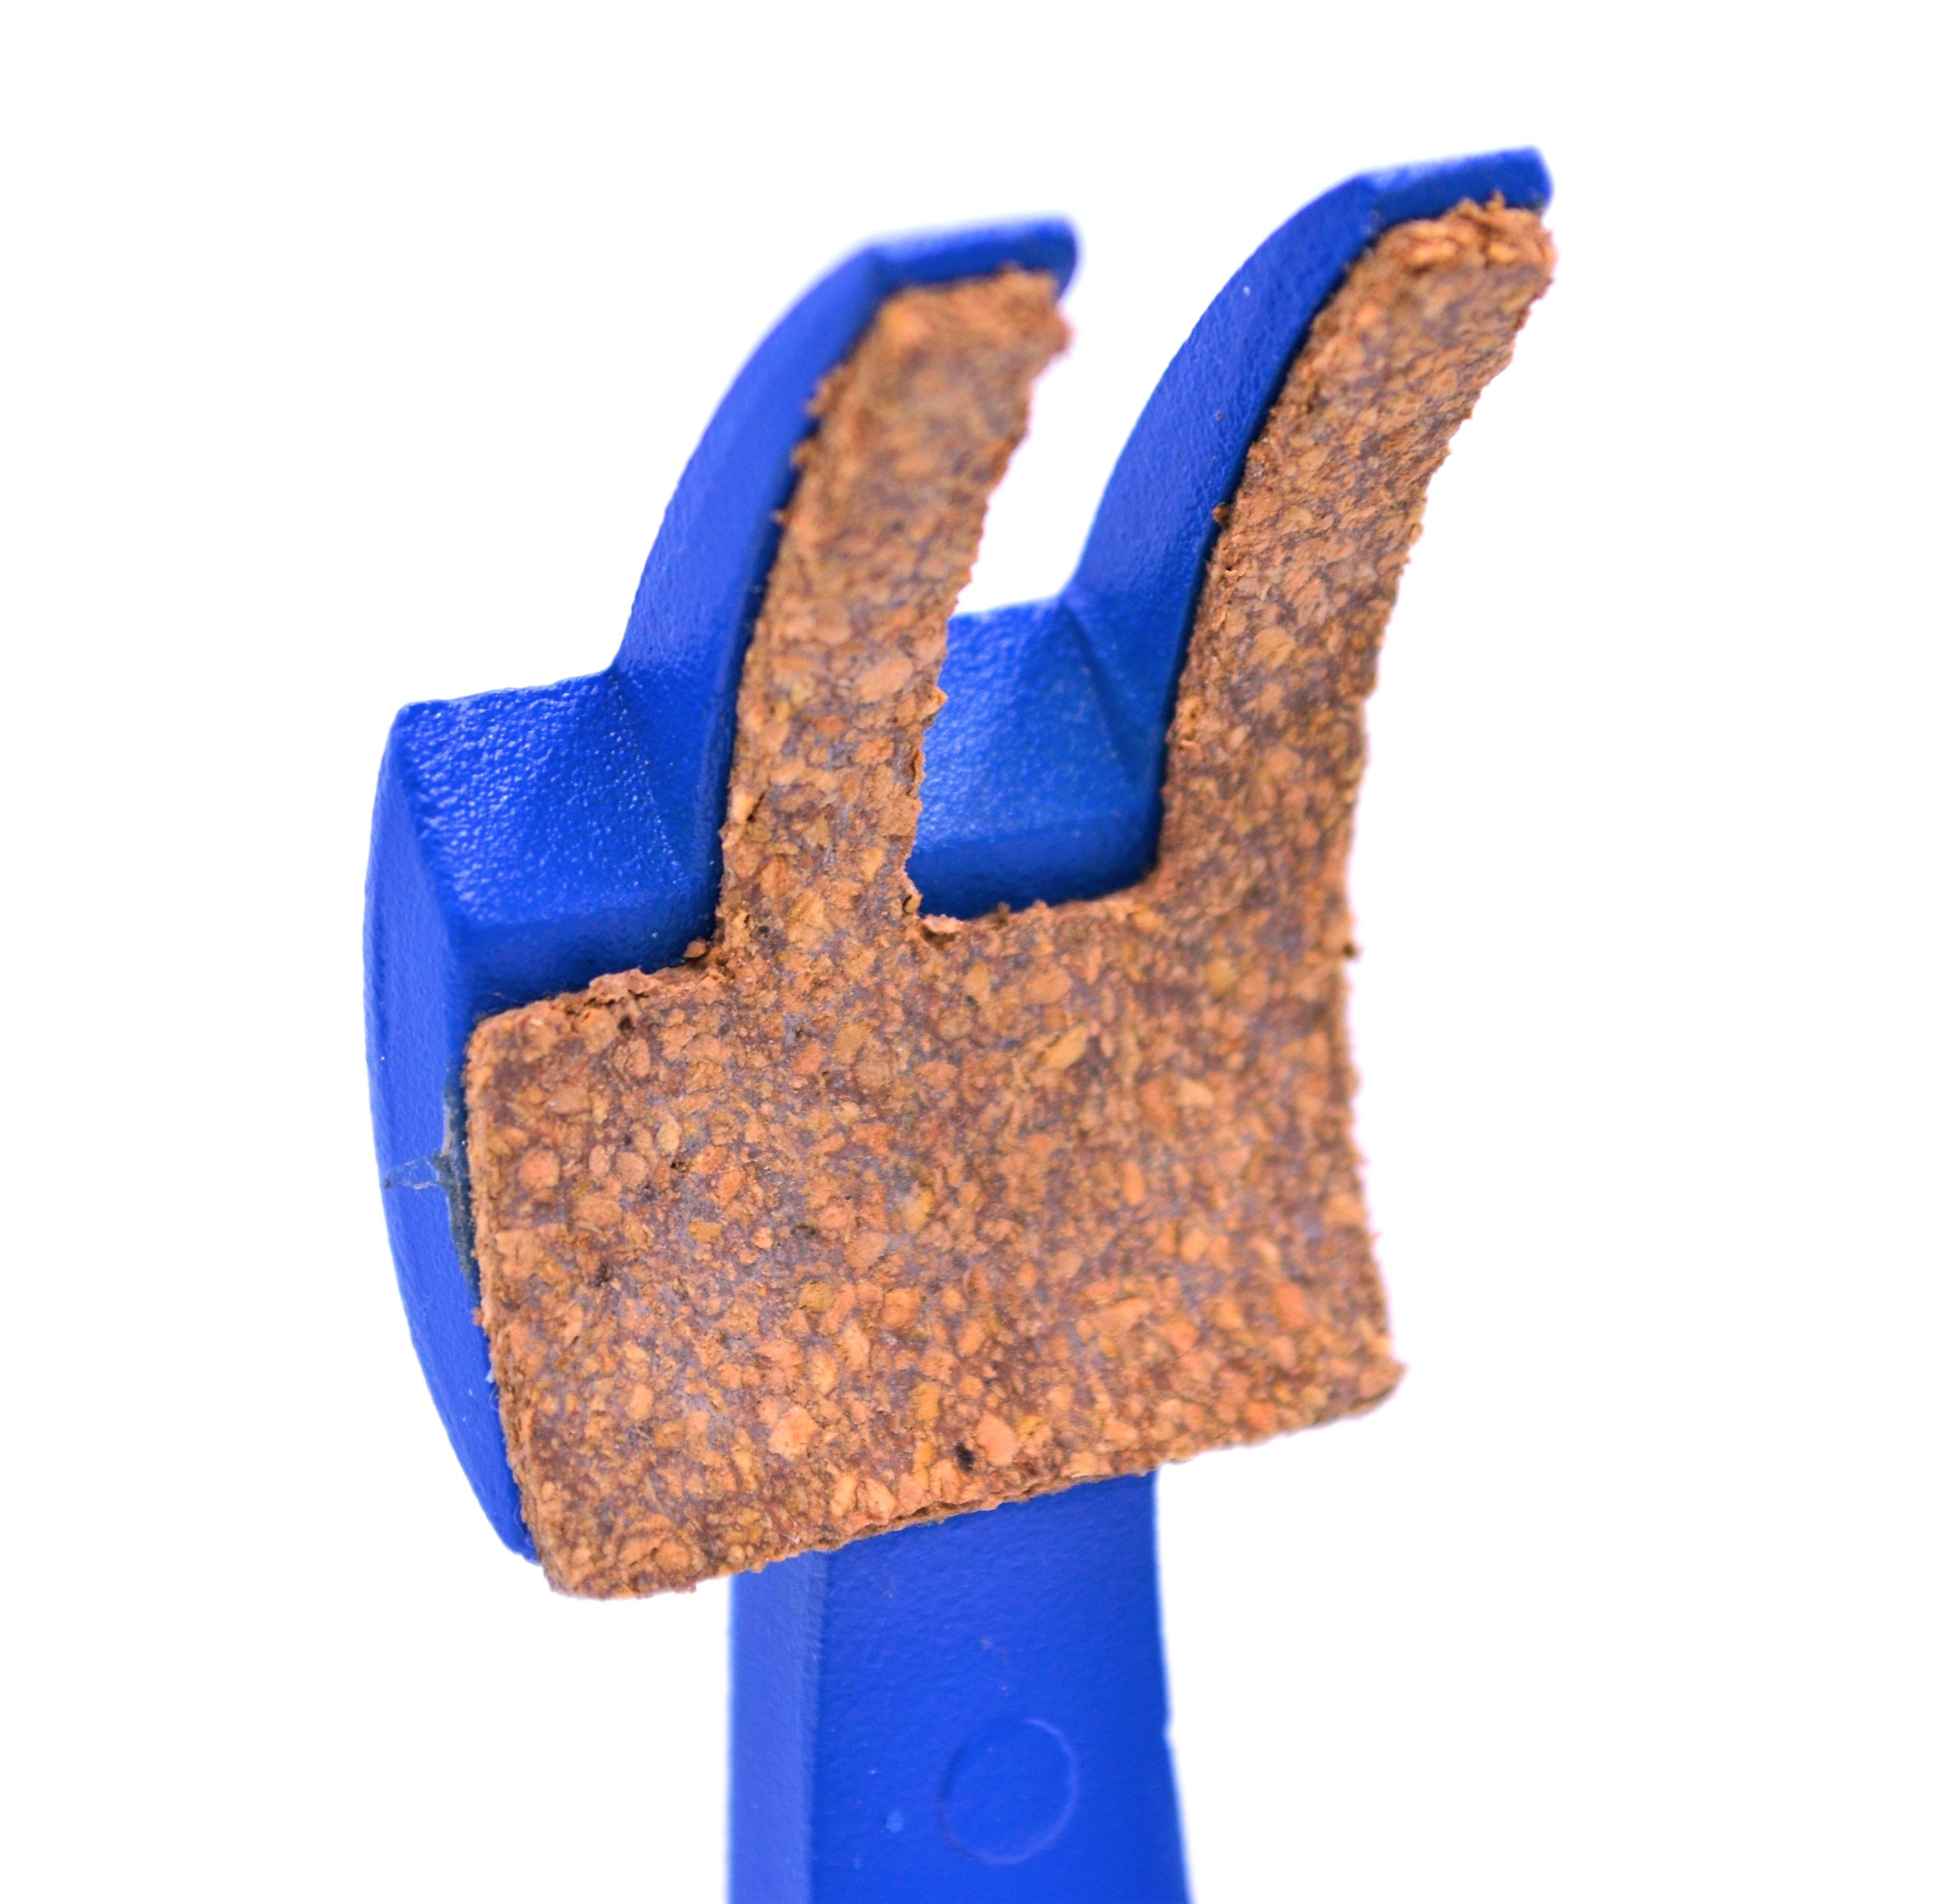 4 Finger Pronged, Cork Lined, Lab Clamp on Rod, 4.25" (10.8 cm) maximum clamp opening